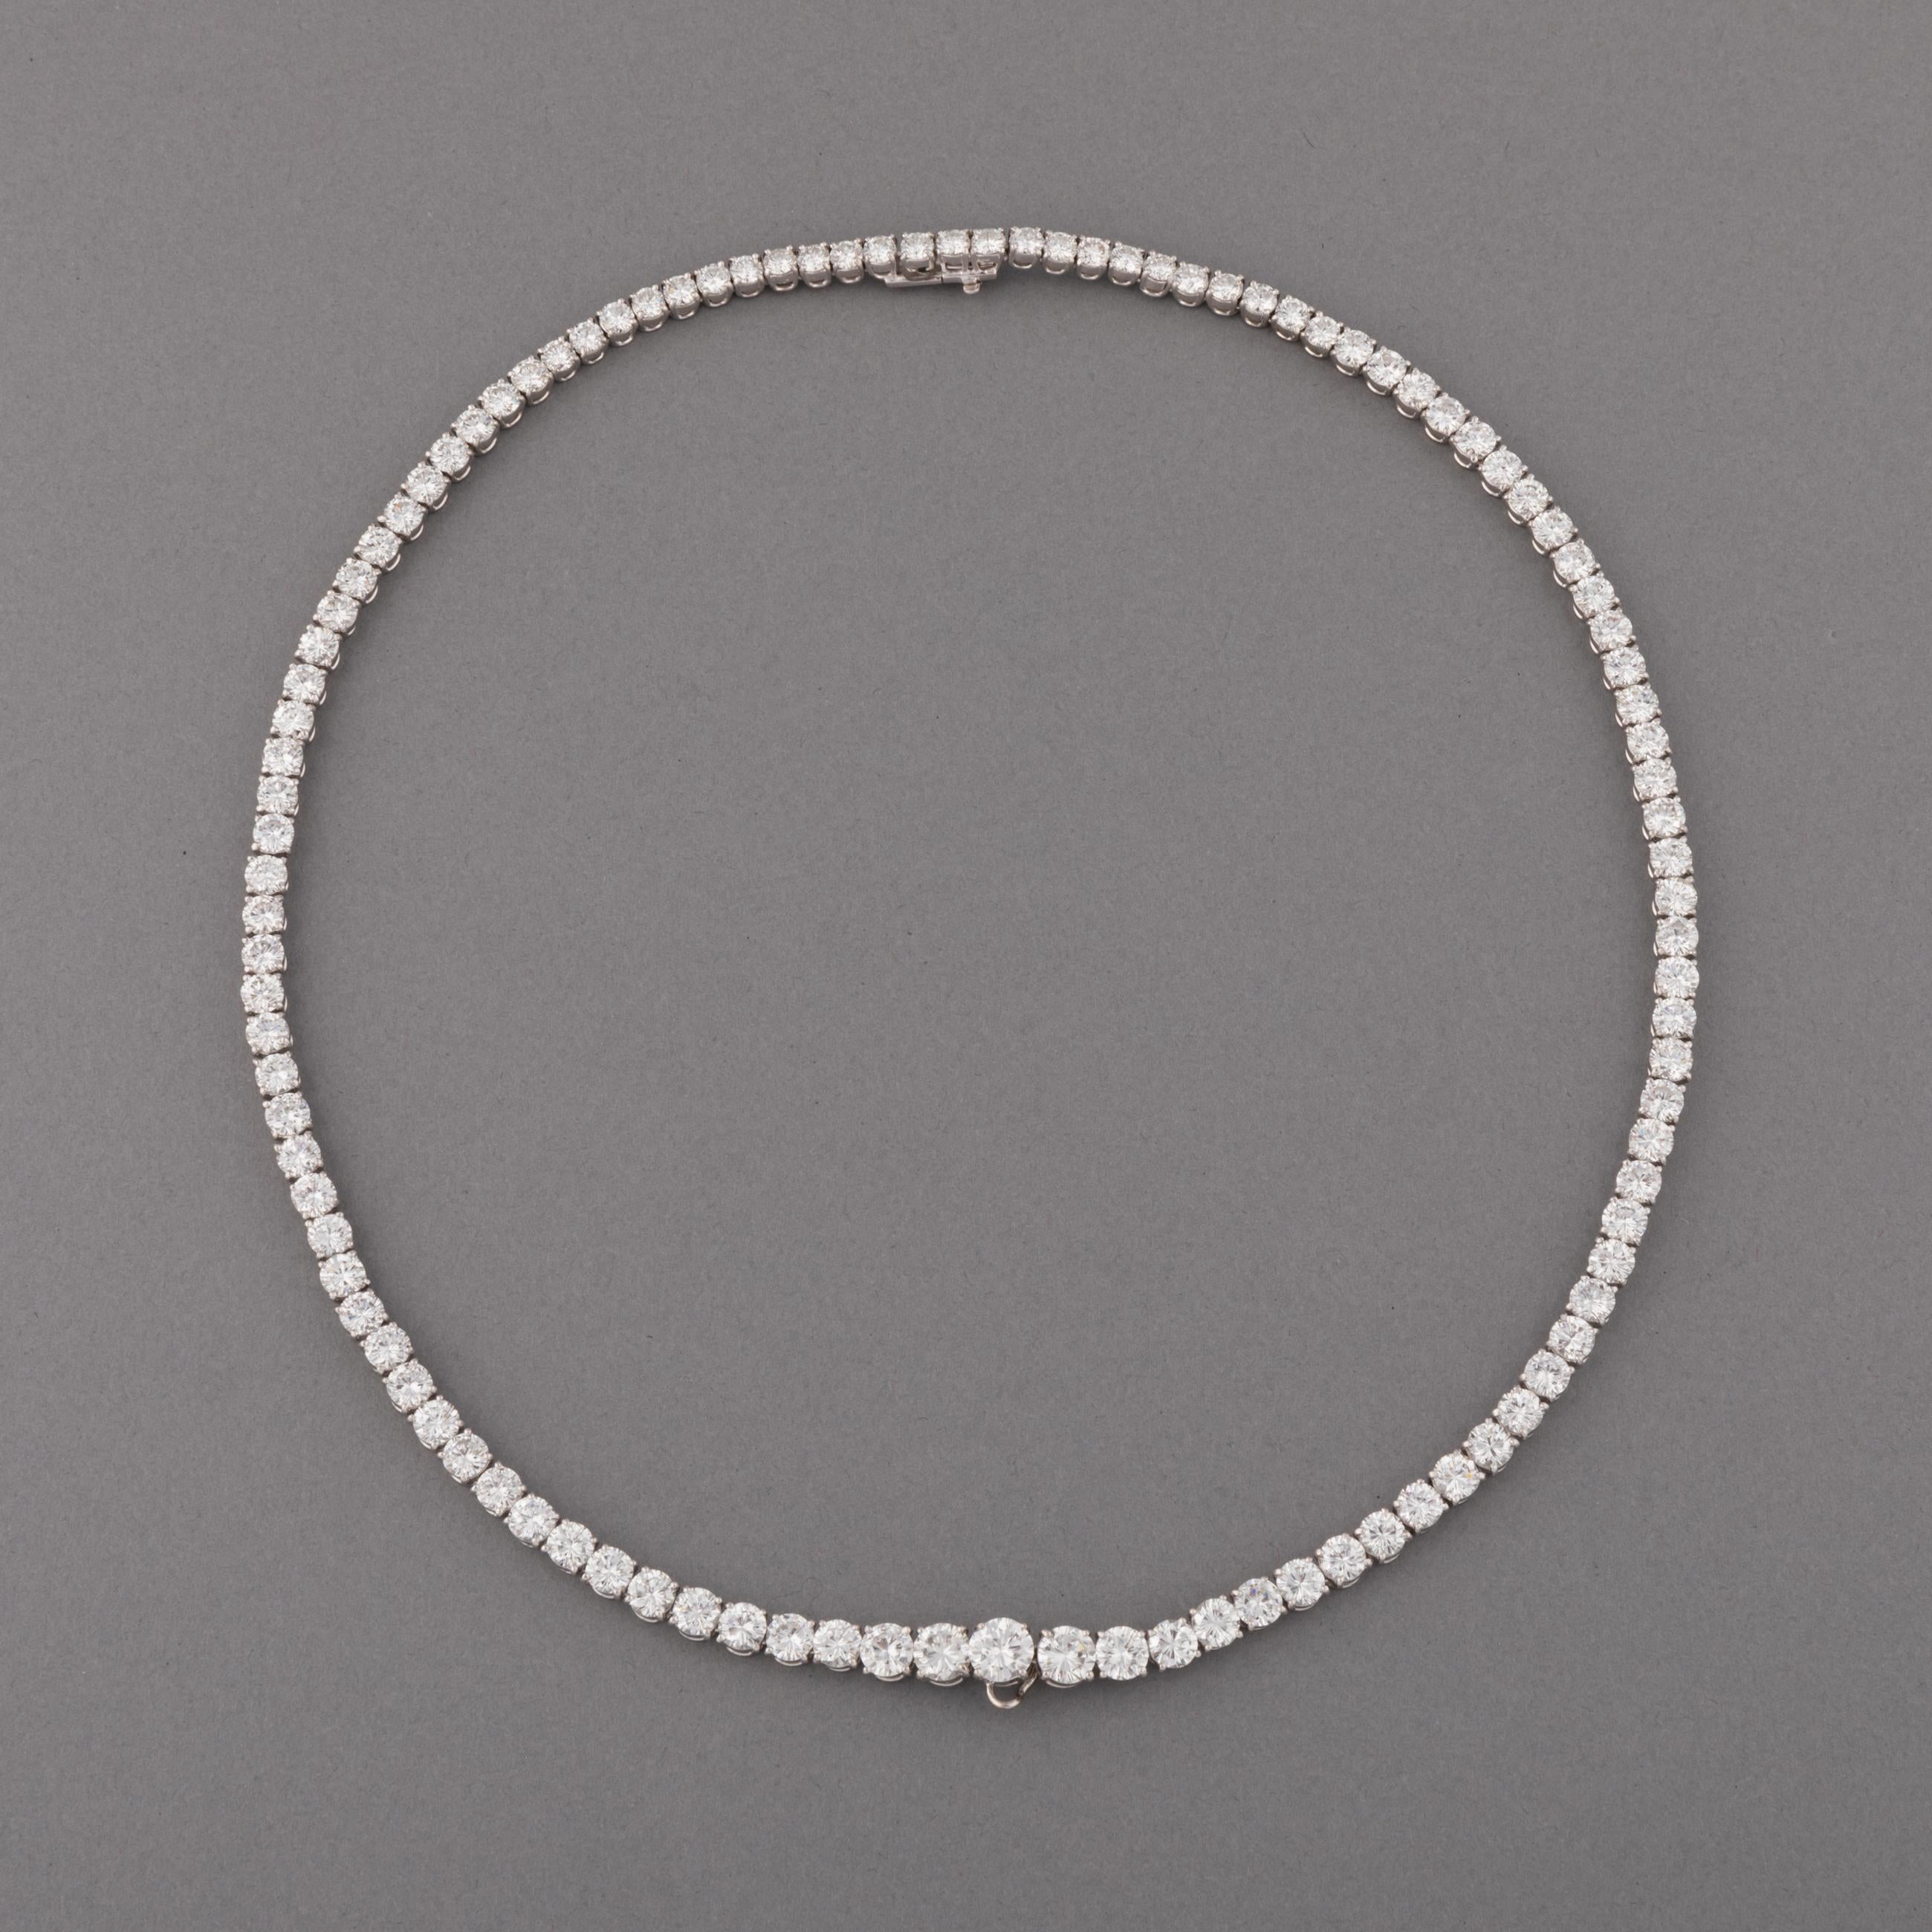 A wonderful vintage necklace, made by Chaumet Paris.
The diamonds are good quality, the color estimate is G and the Clarity VVs/vs. 4or 5 diamonds are Si1. It is made in white gold 18k.
The length is 44 cm. The diamonds size is between P.20 and 0.90